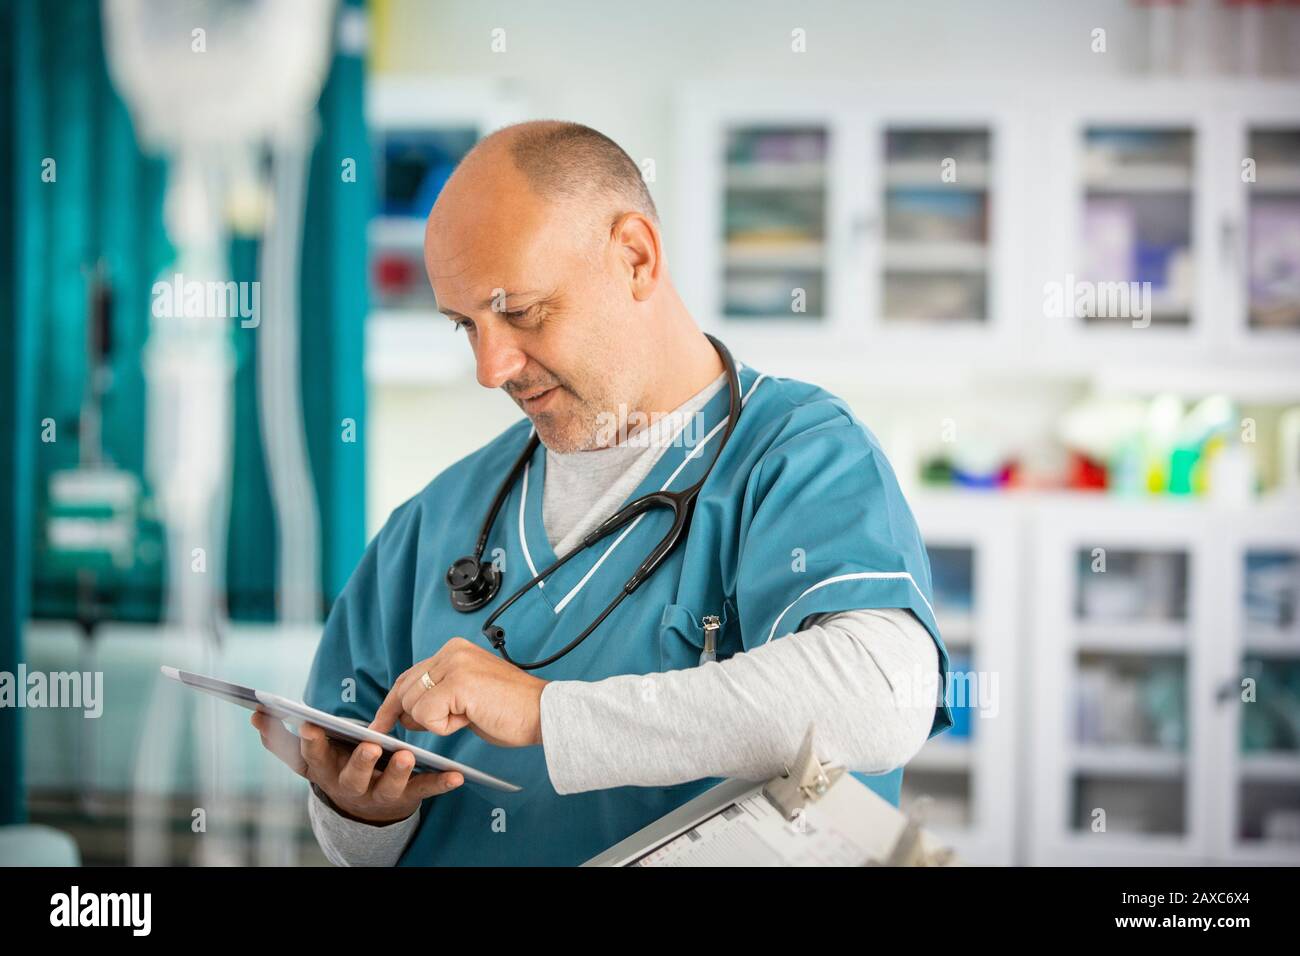 Male doctor using digital tablet in hospital Stock Photo